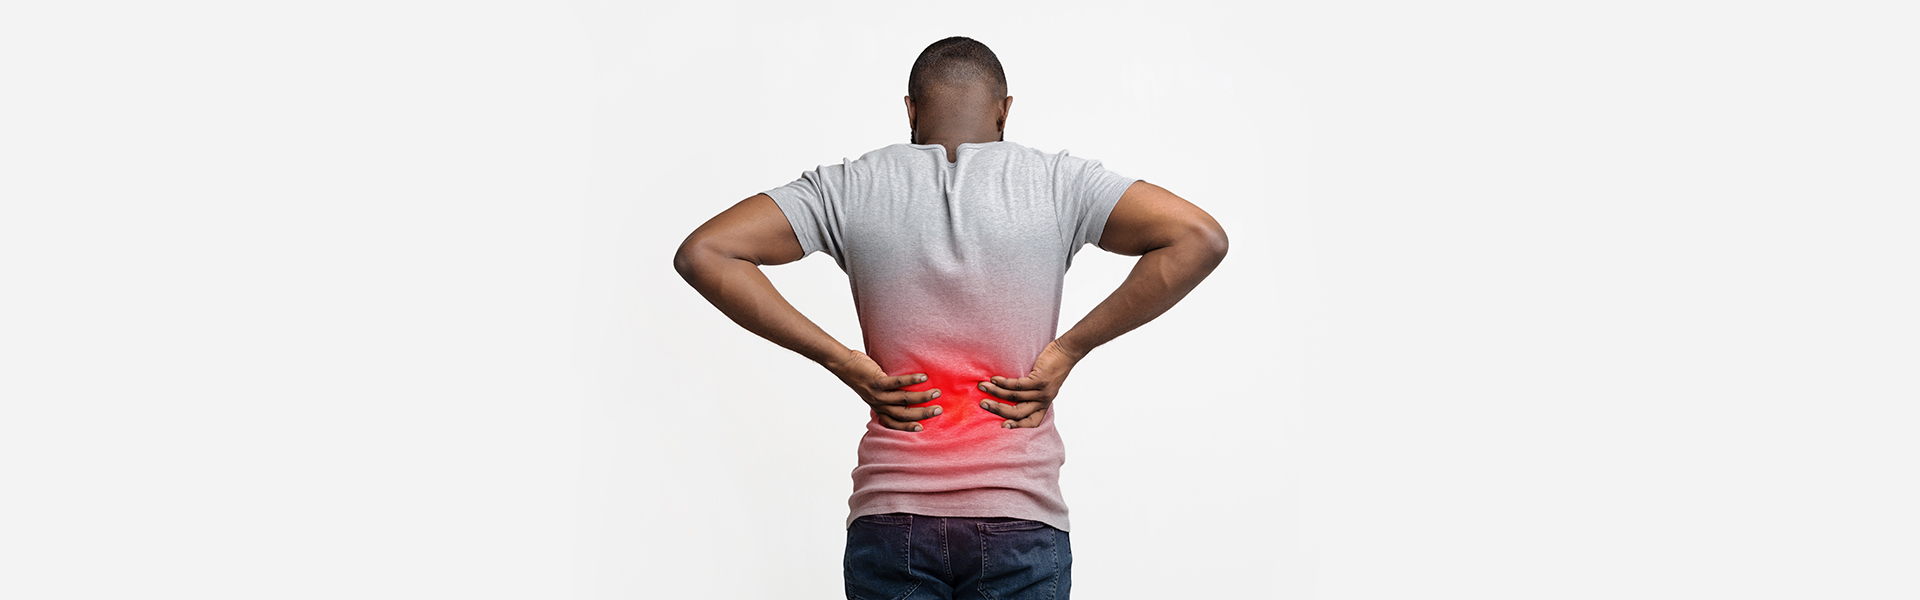 When Should I Consult a Chiropractor for Back Pain?